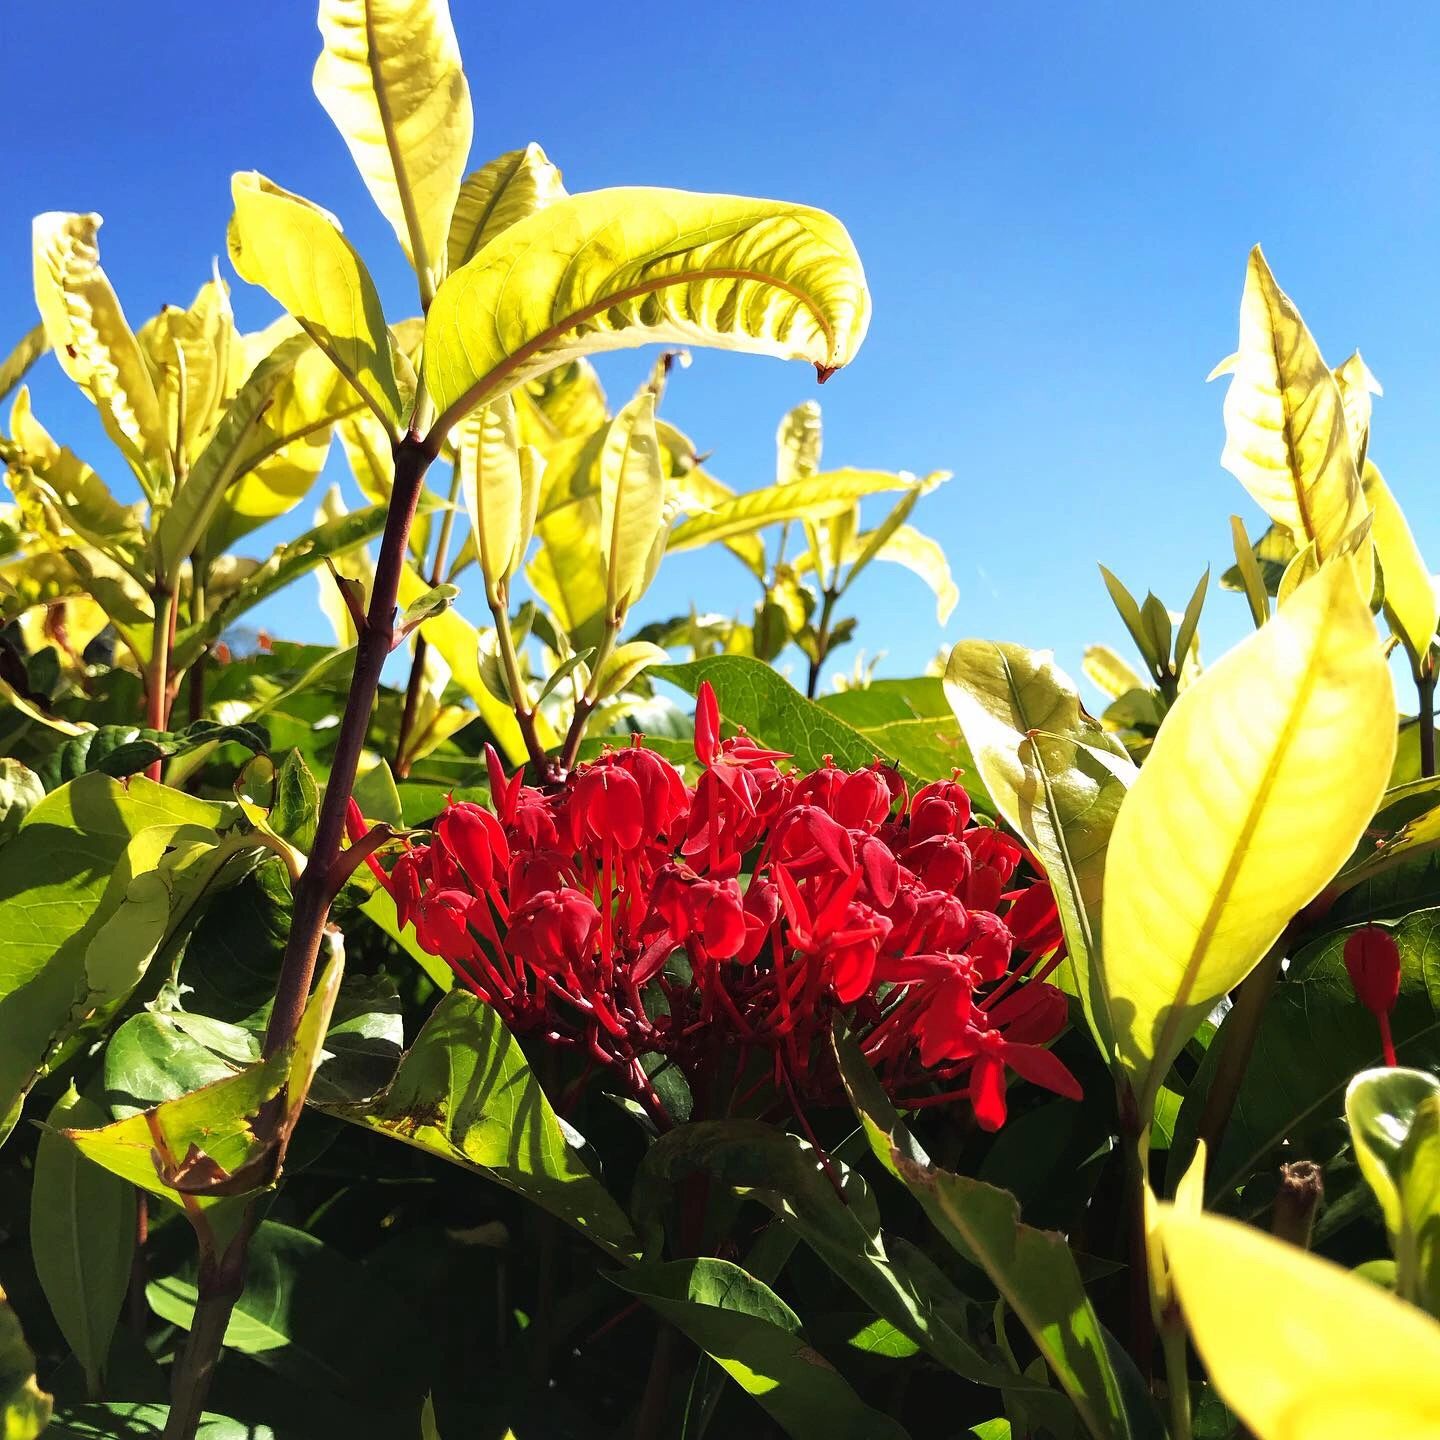 Flowers and leaves against blue sky - book now